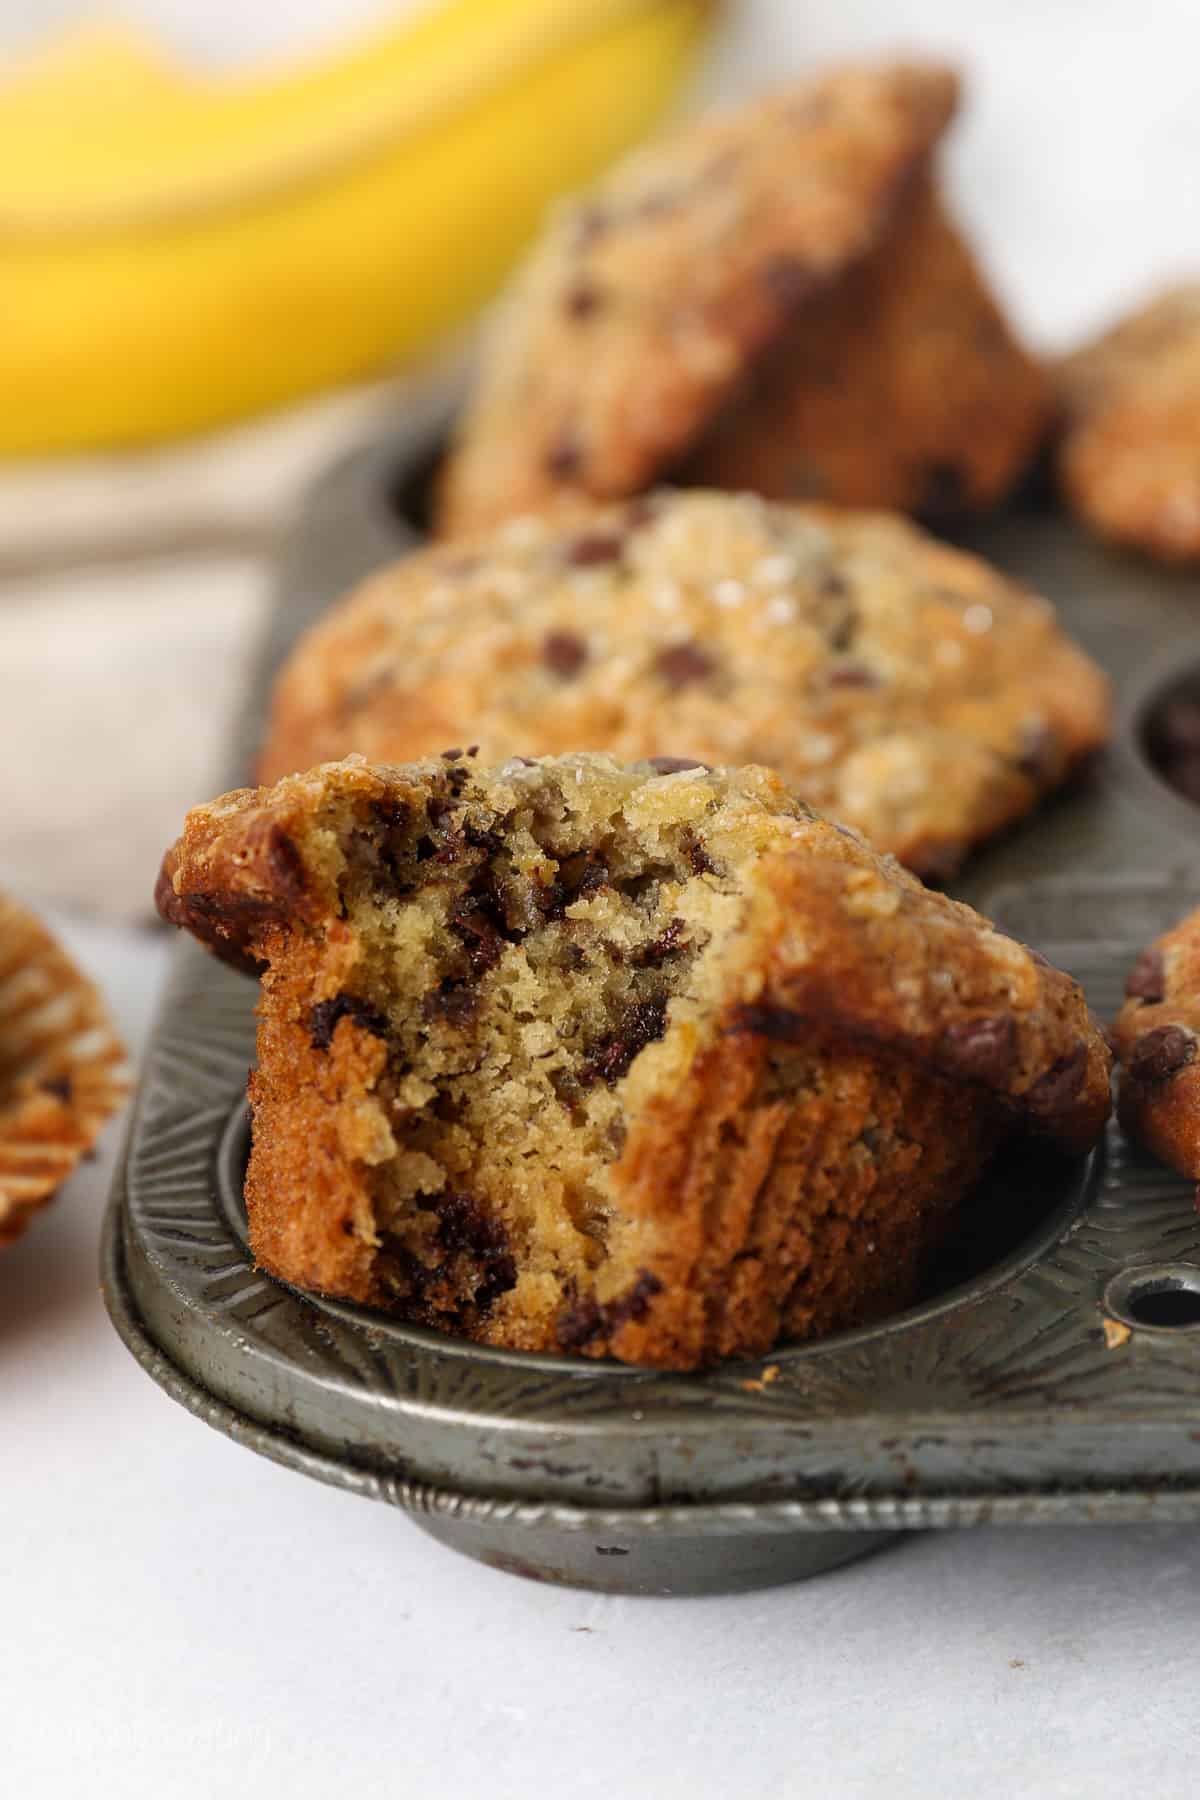 A banana chocolate chip muffin with a bite missing resting in the well of a muffin pan.